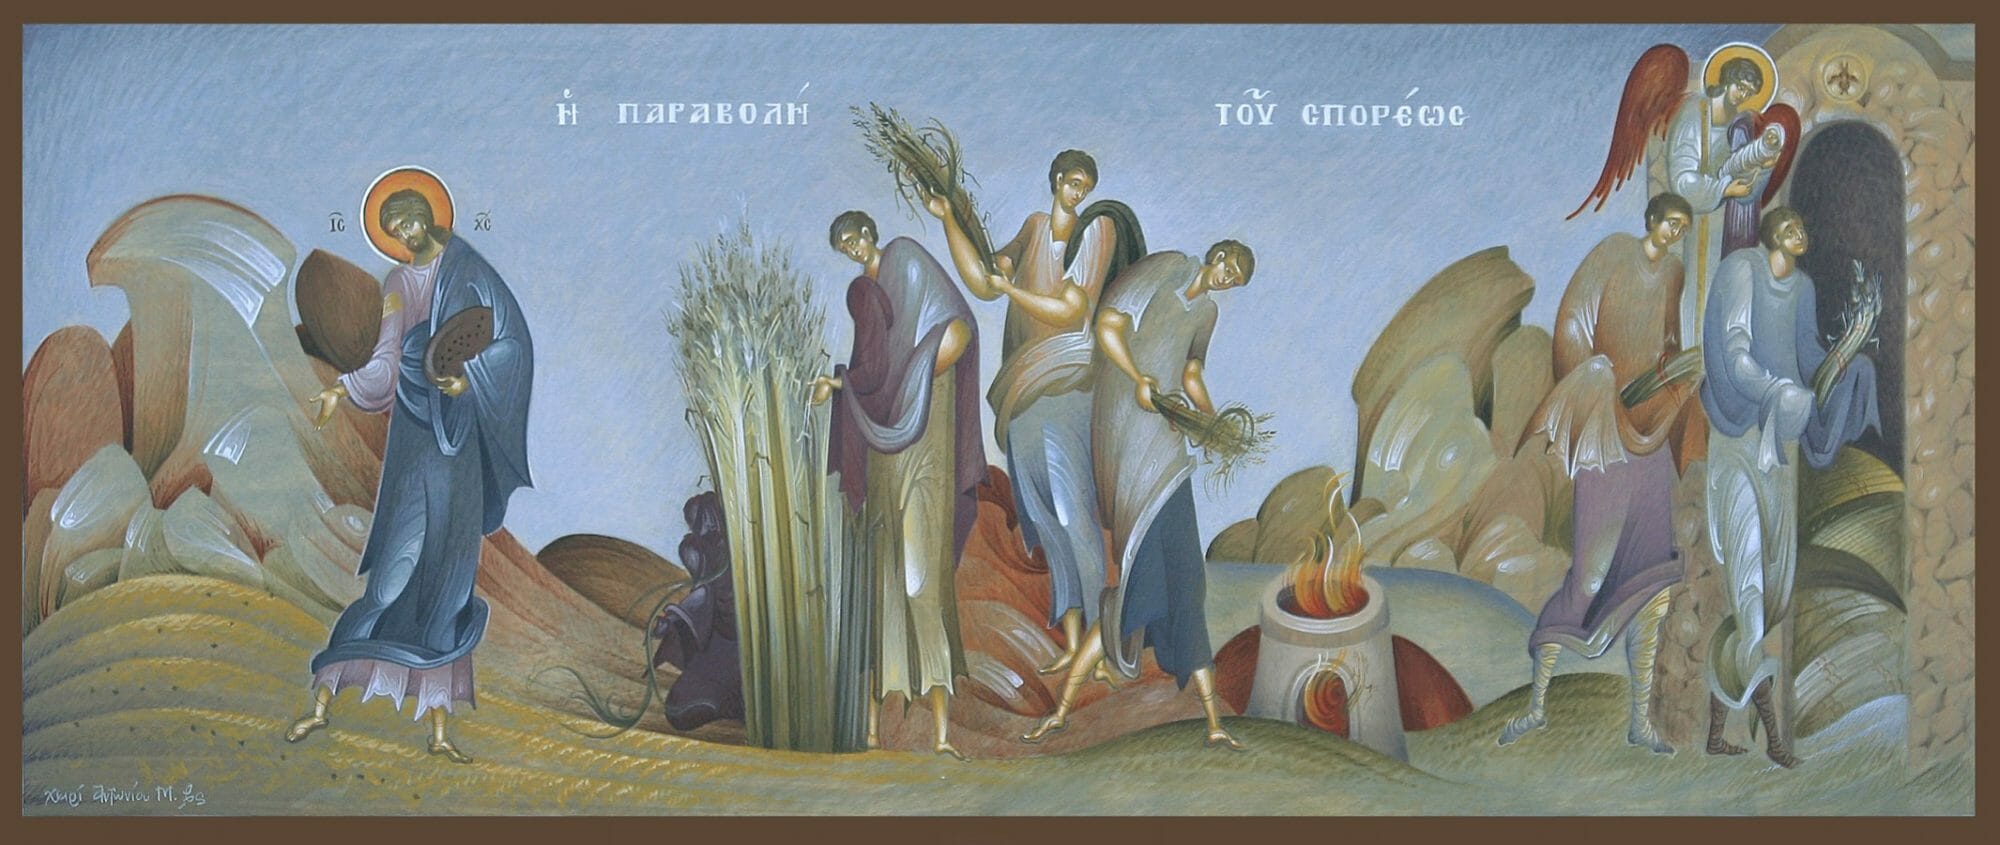 Parable of the Sower, by Fikos, 2006. Egg tempera on prepared wood, 70×30 cm.